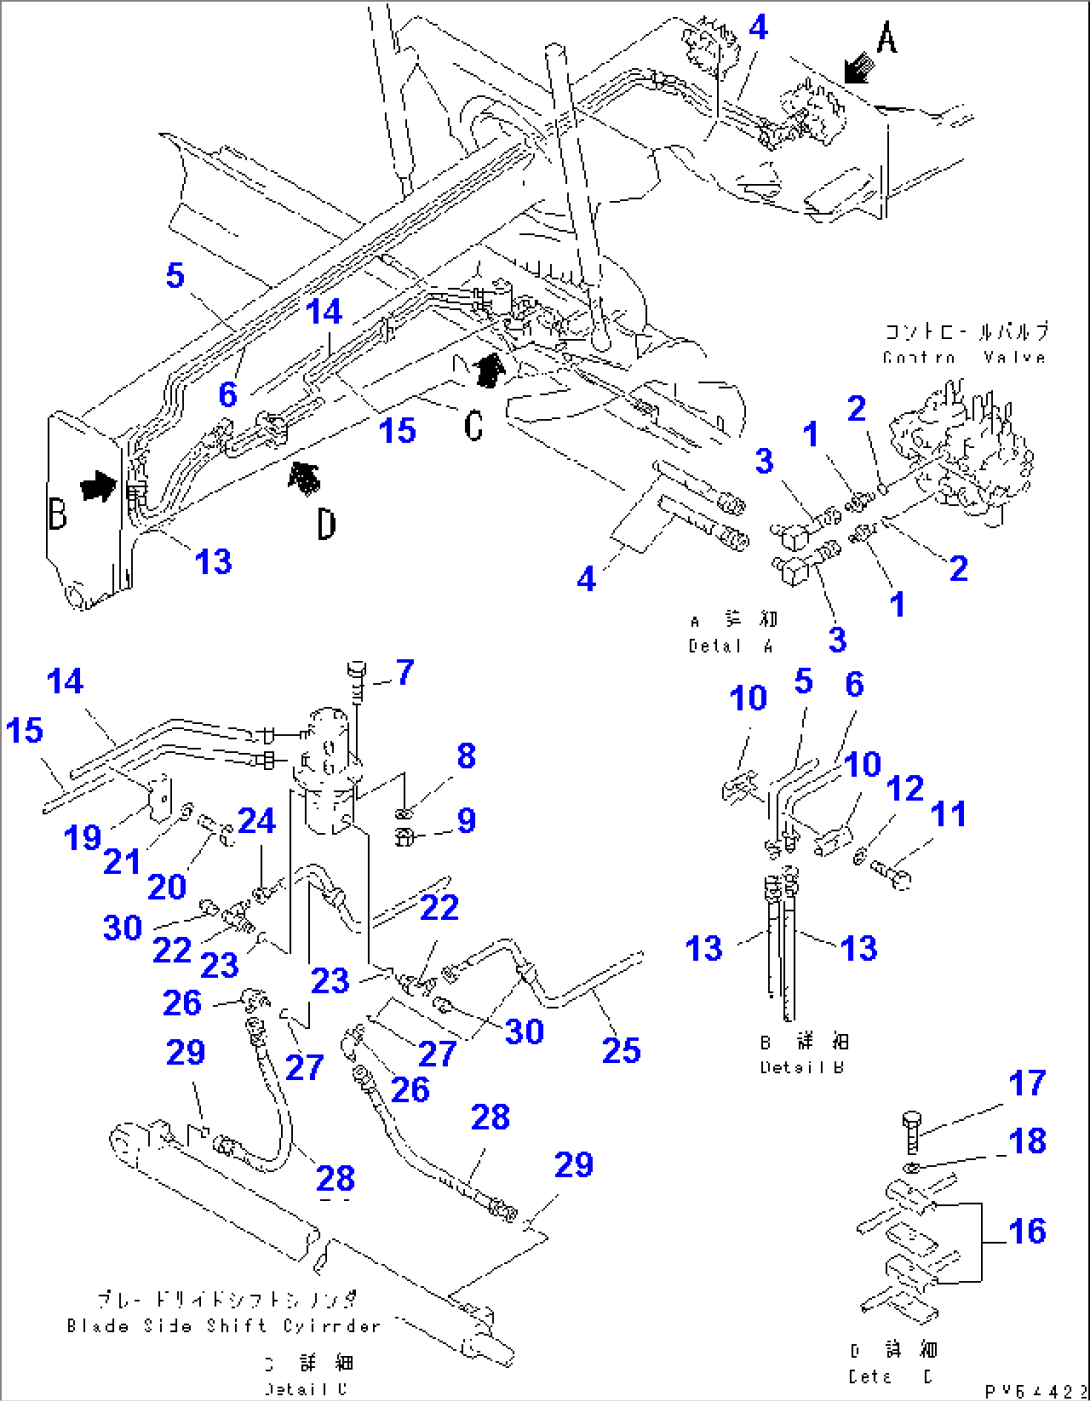 HYDRAULIC PIPING (BLADE SHIFT CYLINDER LINE)(#10049-)